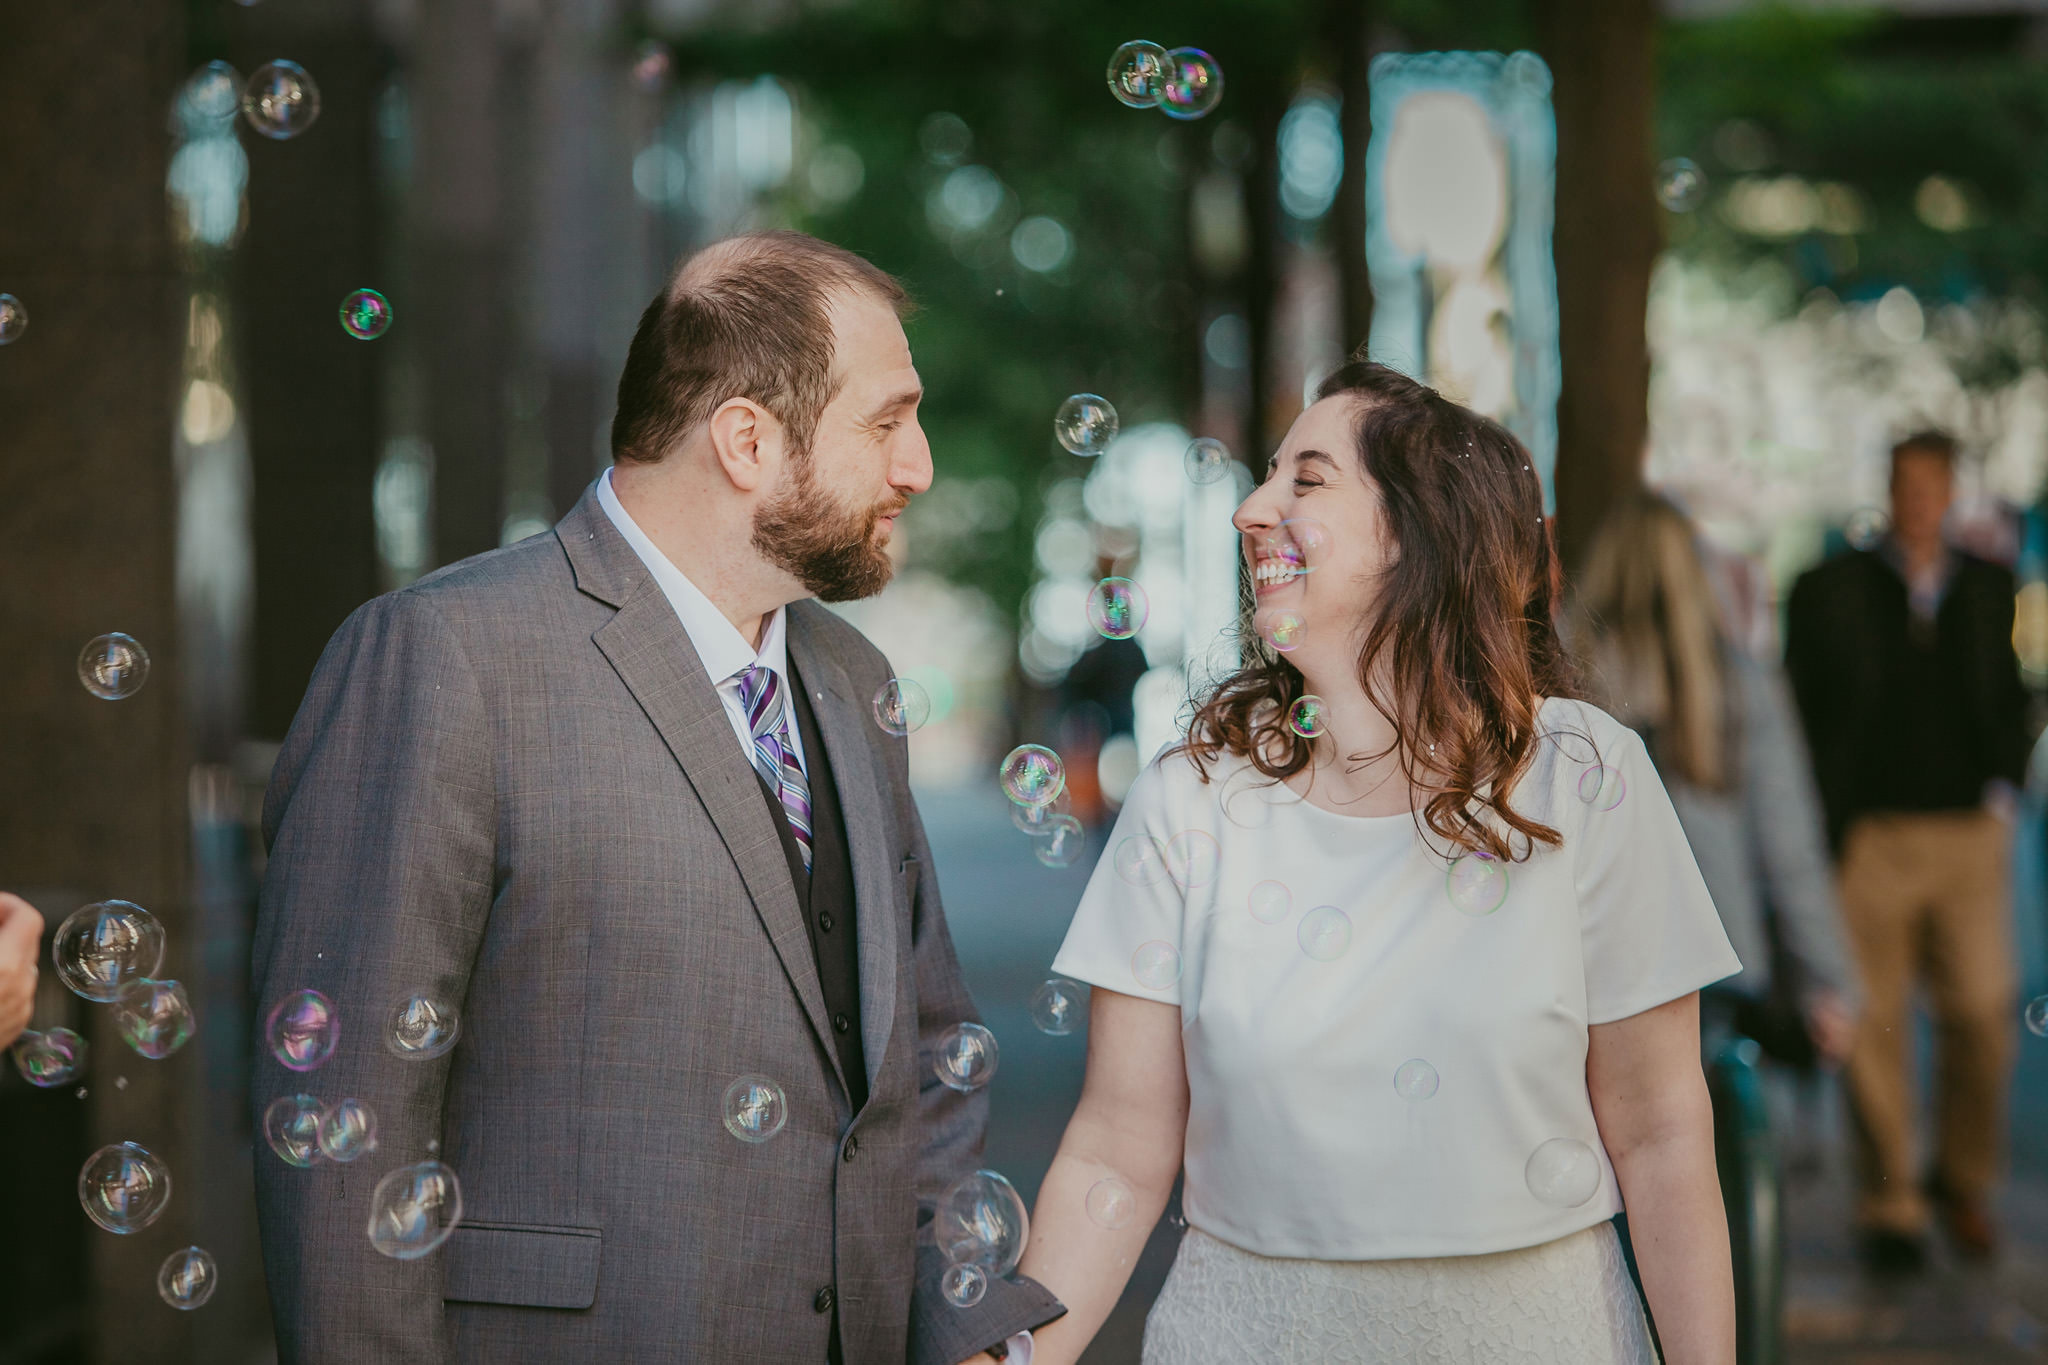 bubbles surround this newlywed couple on the streets of uptown Charlotte